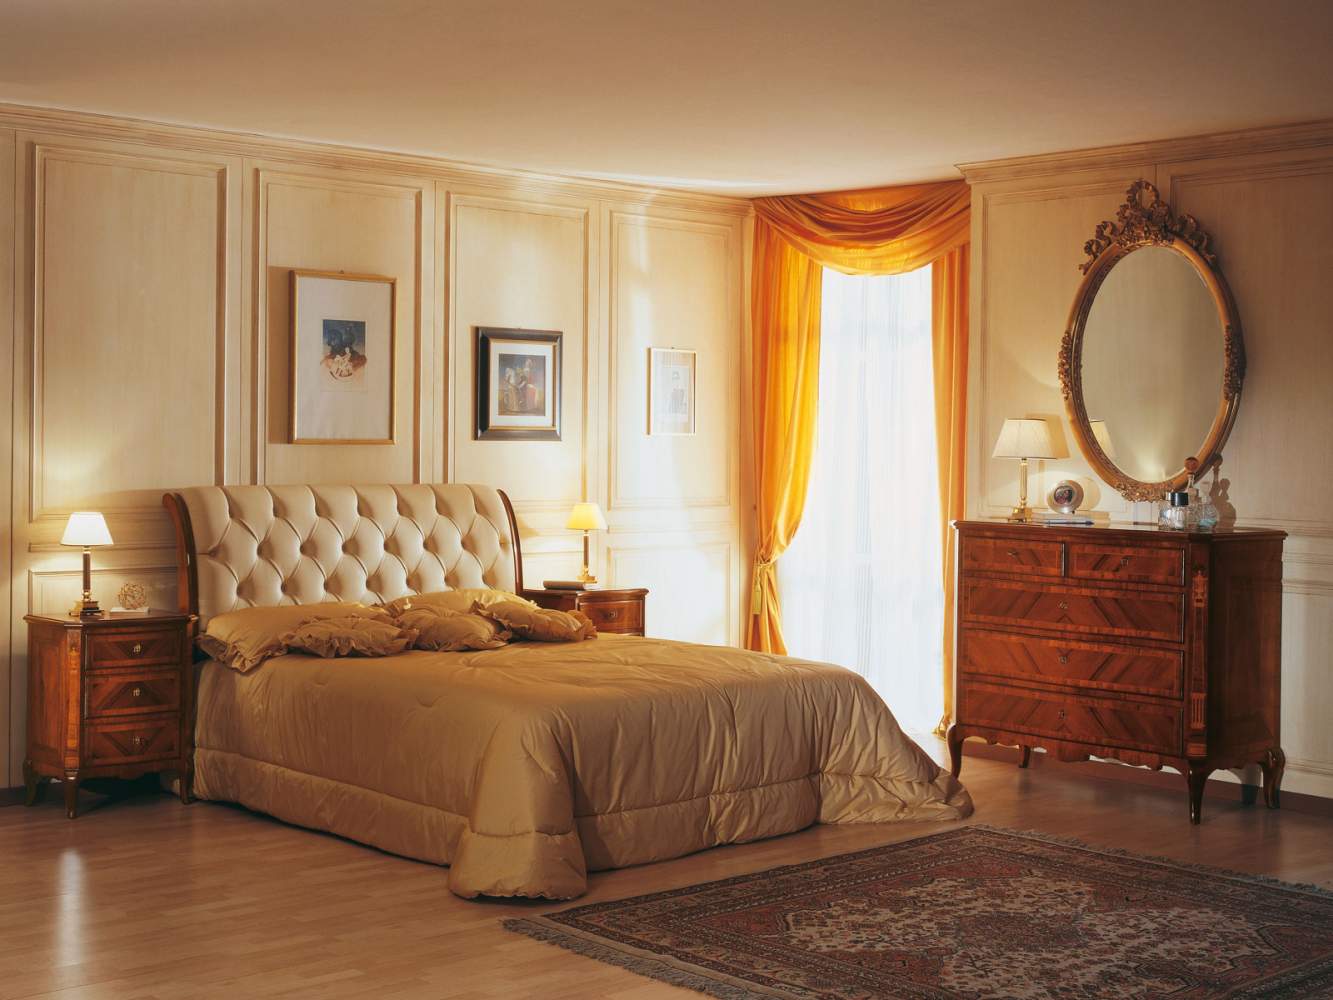 French bedroom in the vogue style in the Nineteenth Century with night furnishings in inlaid walnut